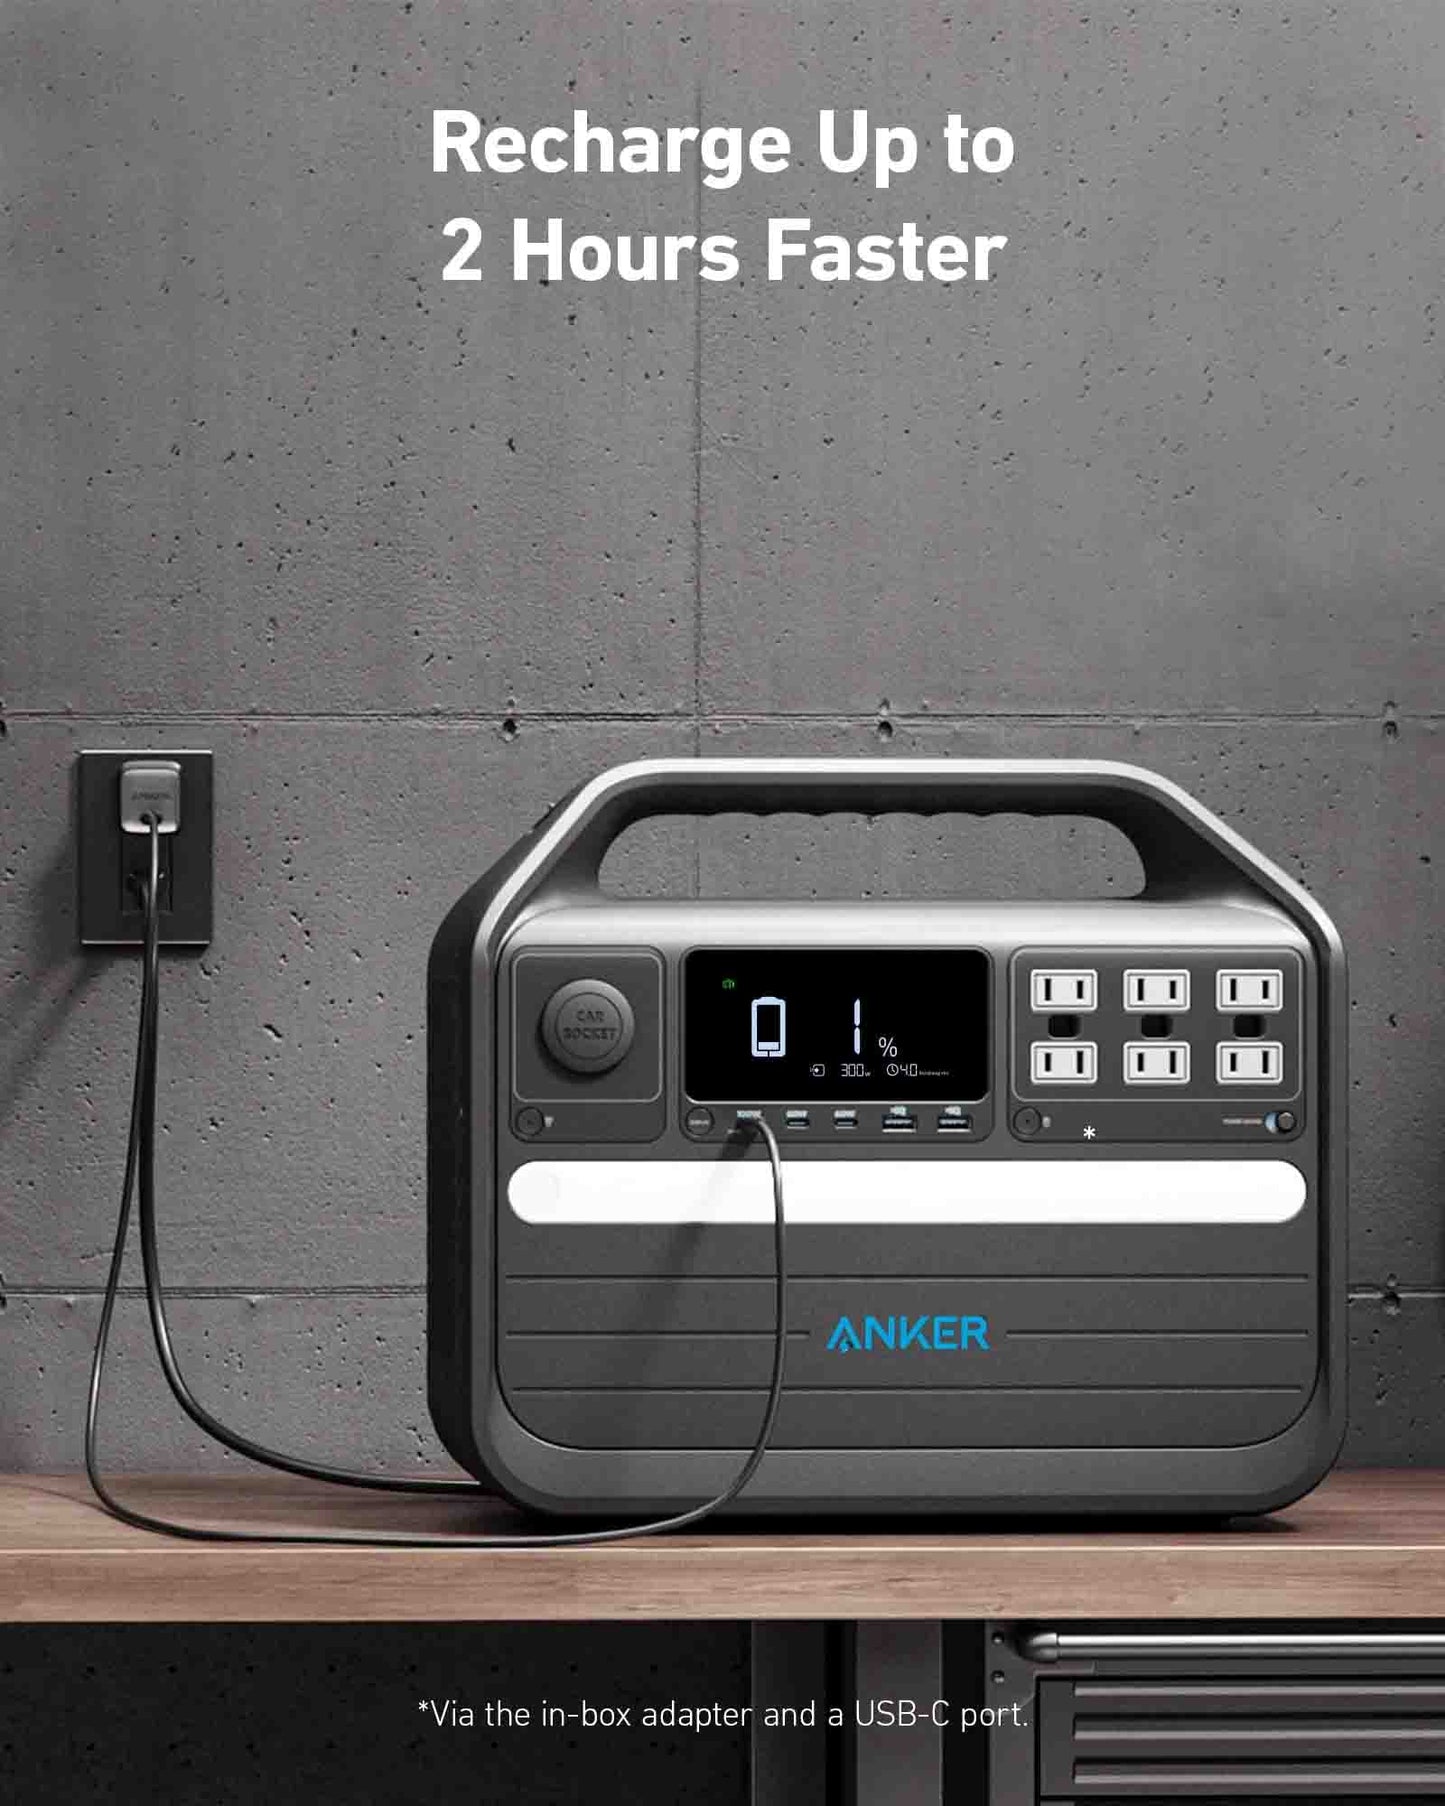 Recharge The Anker PowerHouse 555 Up To 2 Hours Faster Using An AC Wall Outlet